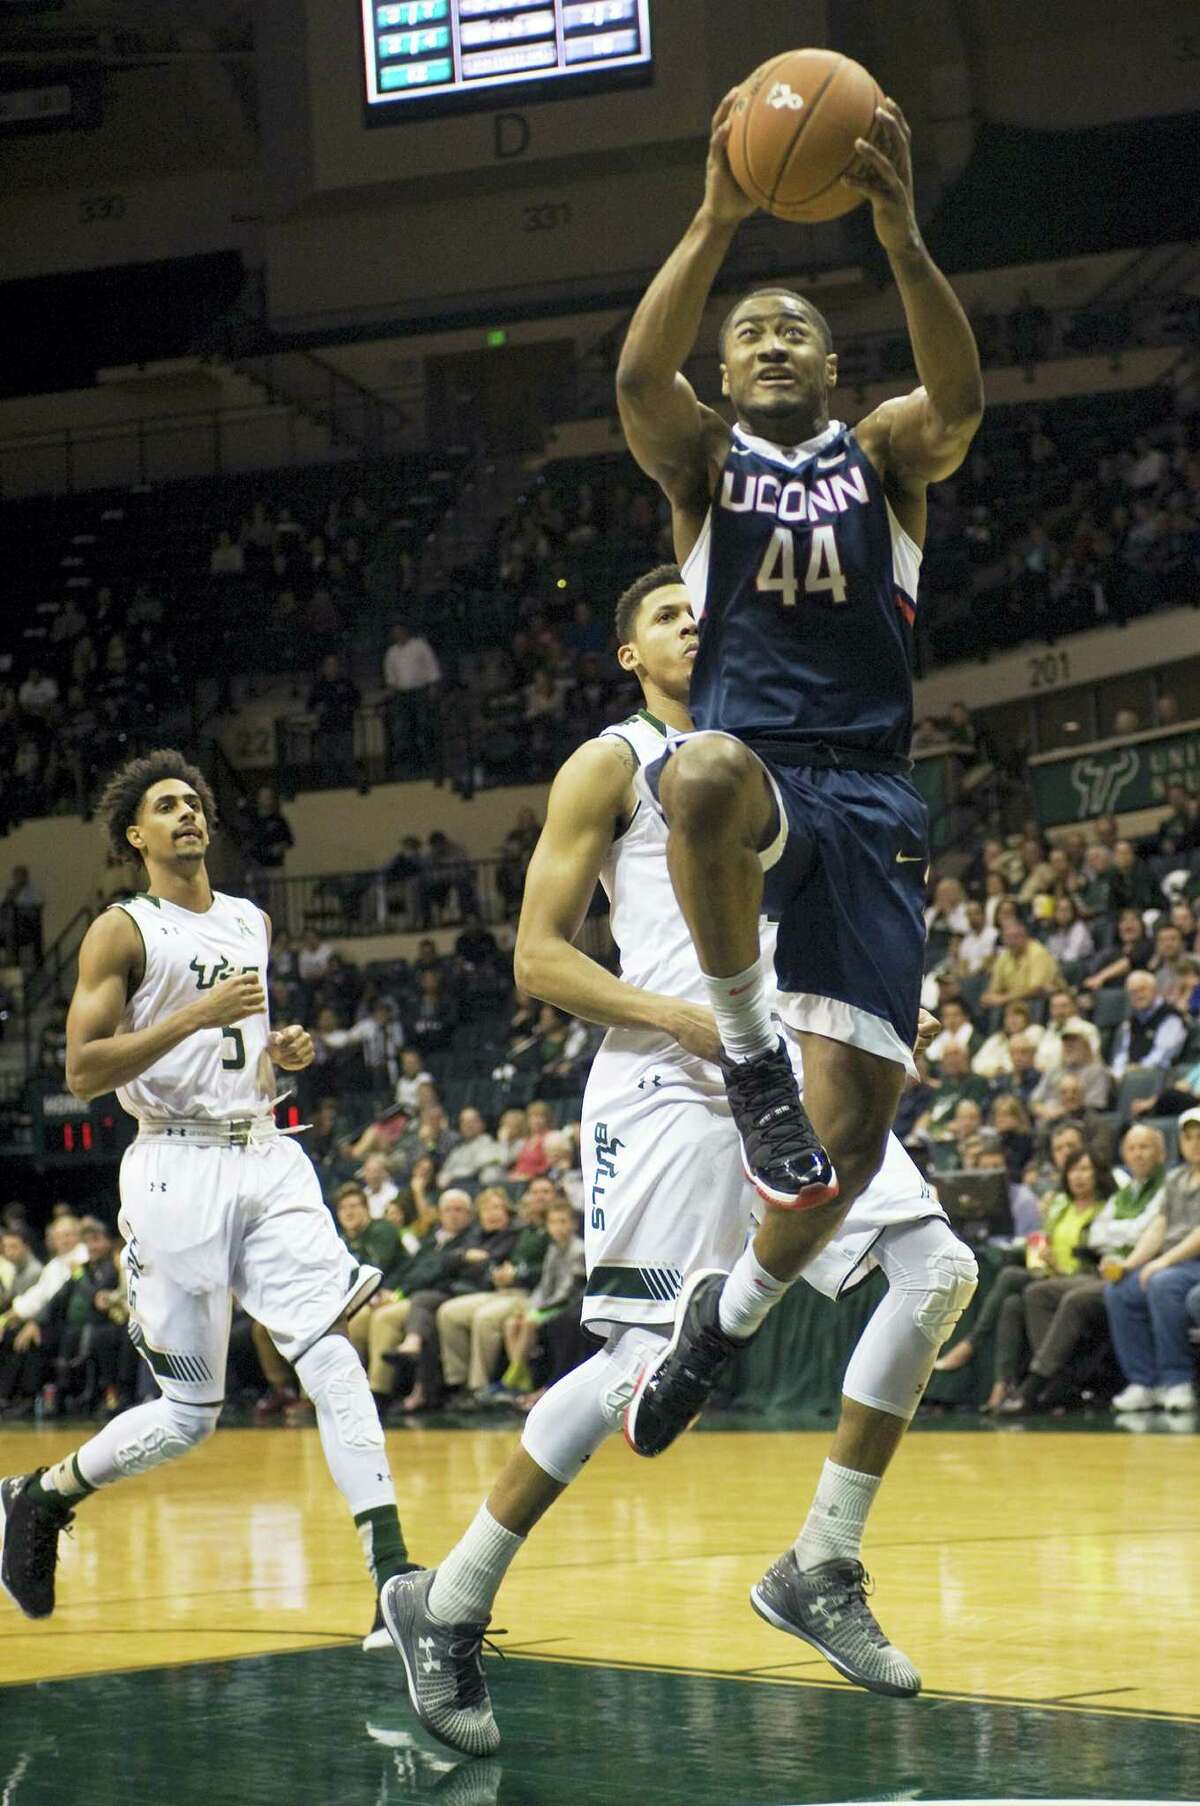 UConn’s Rodney Purvis (44) scores past South Florida’s Nehemias Morillo (5) and Angel Nunez, center, during the first half Thursday in Tampa, Fla.